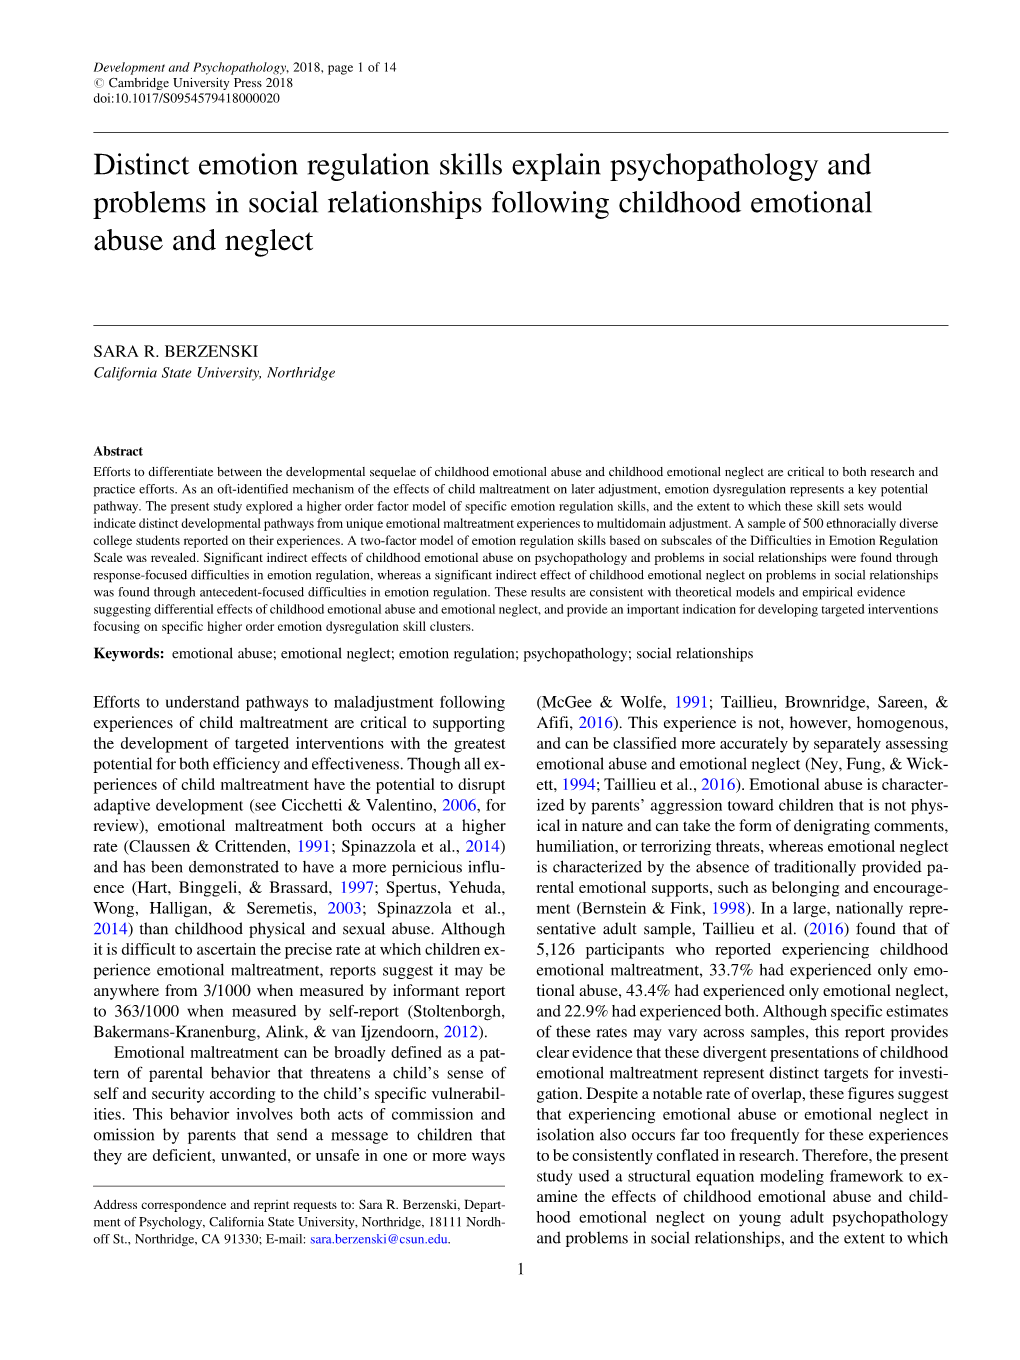 Distinct Emotion Regulation Skills Explain Psychopathology and Problems in Social Relationships Following Childhood Emotional Abuse and Neglect